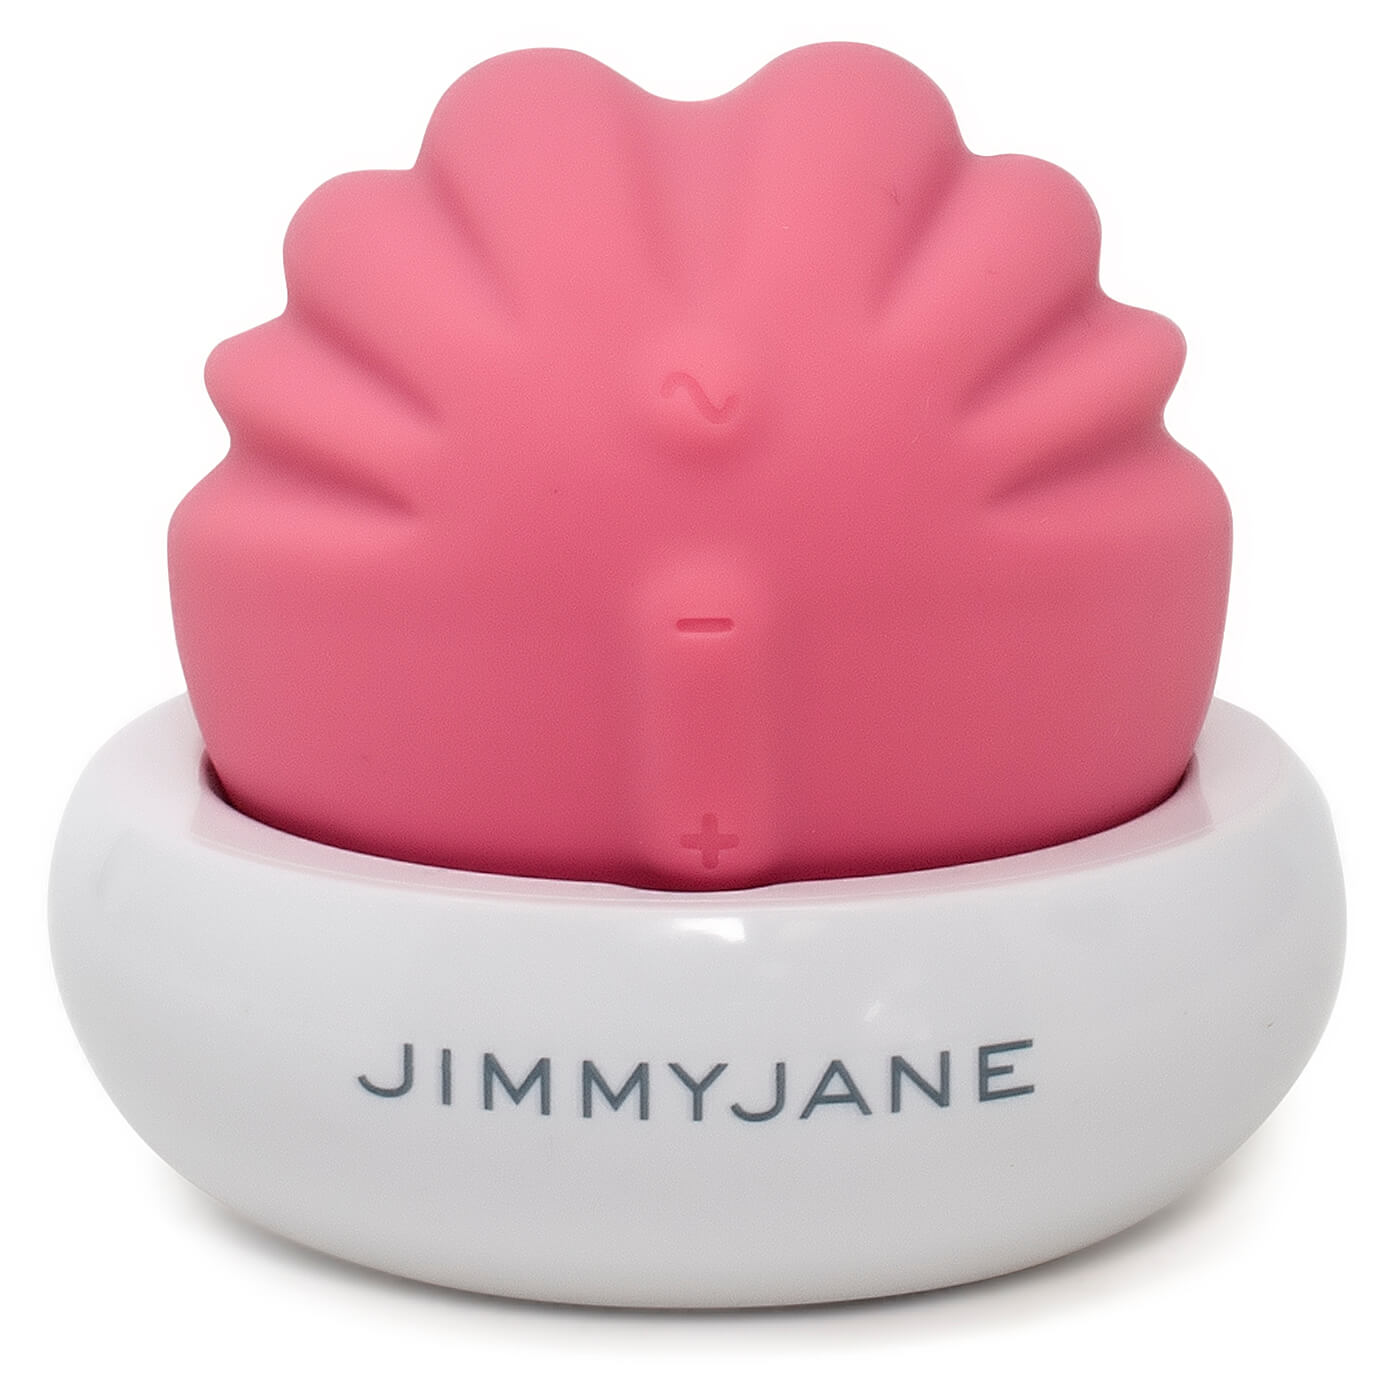 Jimmyjane Coral Love Pod 9 Function USB Rechargeable Clitoral Vibrator